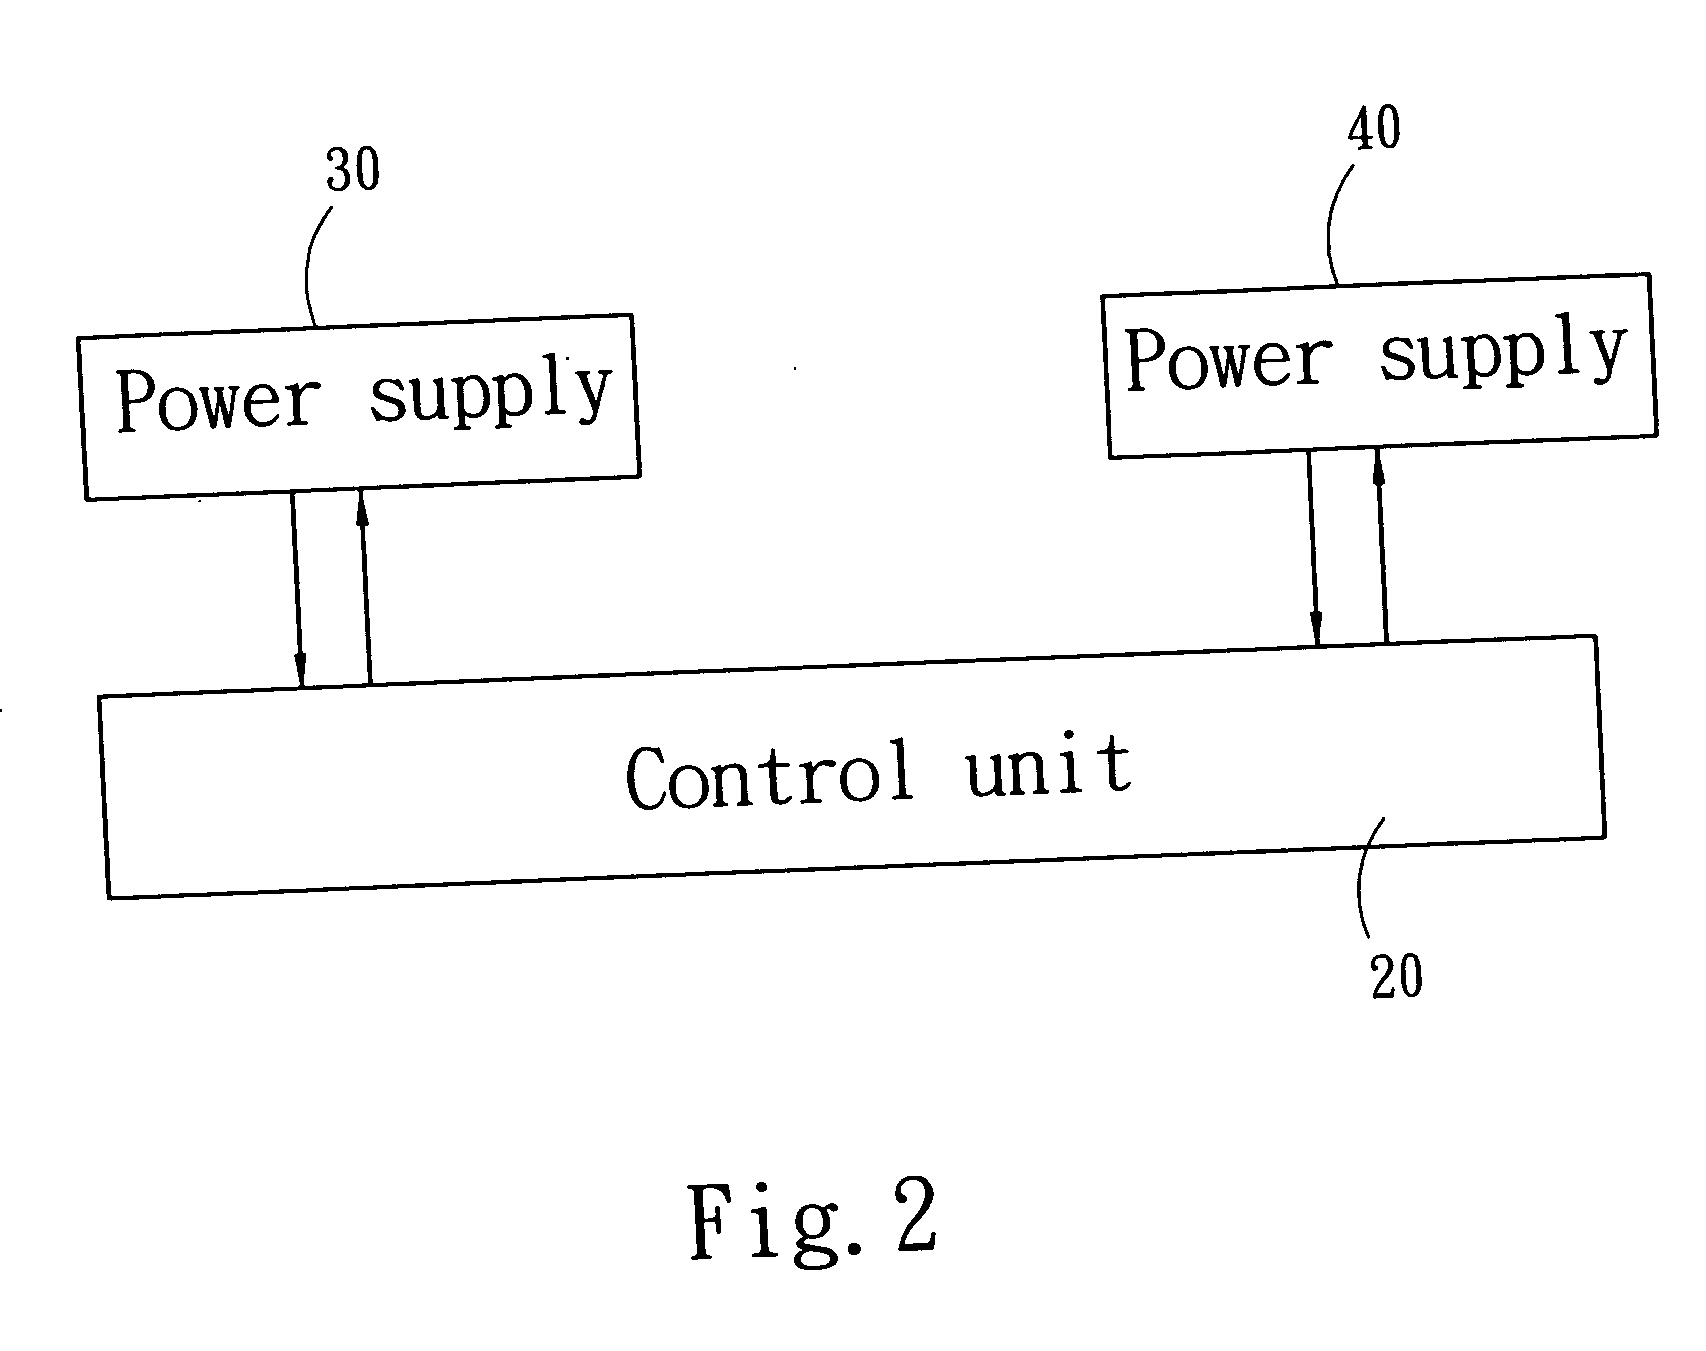 Chain reaction control circuit for parallel power supply